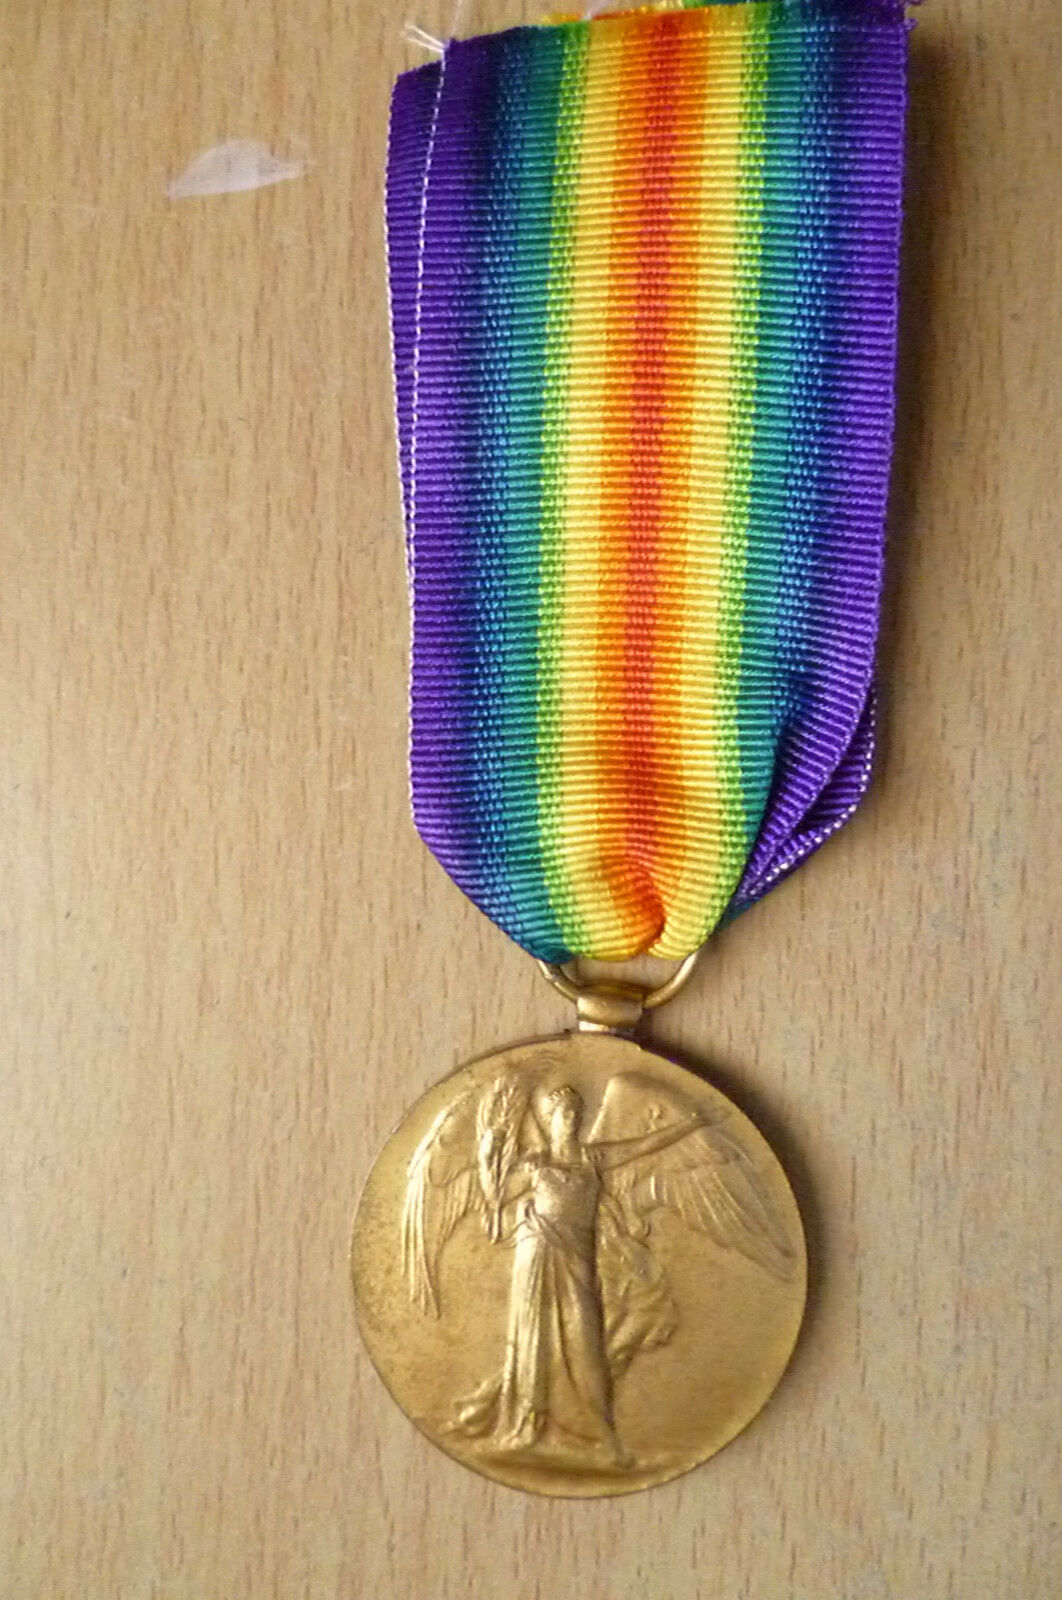 ROYAL NAVY WW1 VICTORY MEDALS TO R 3786 ABLE SEAMAN JG PEARSON (SUP ORIGINAL)